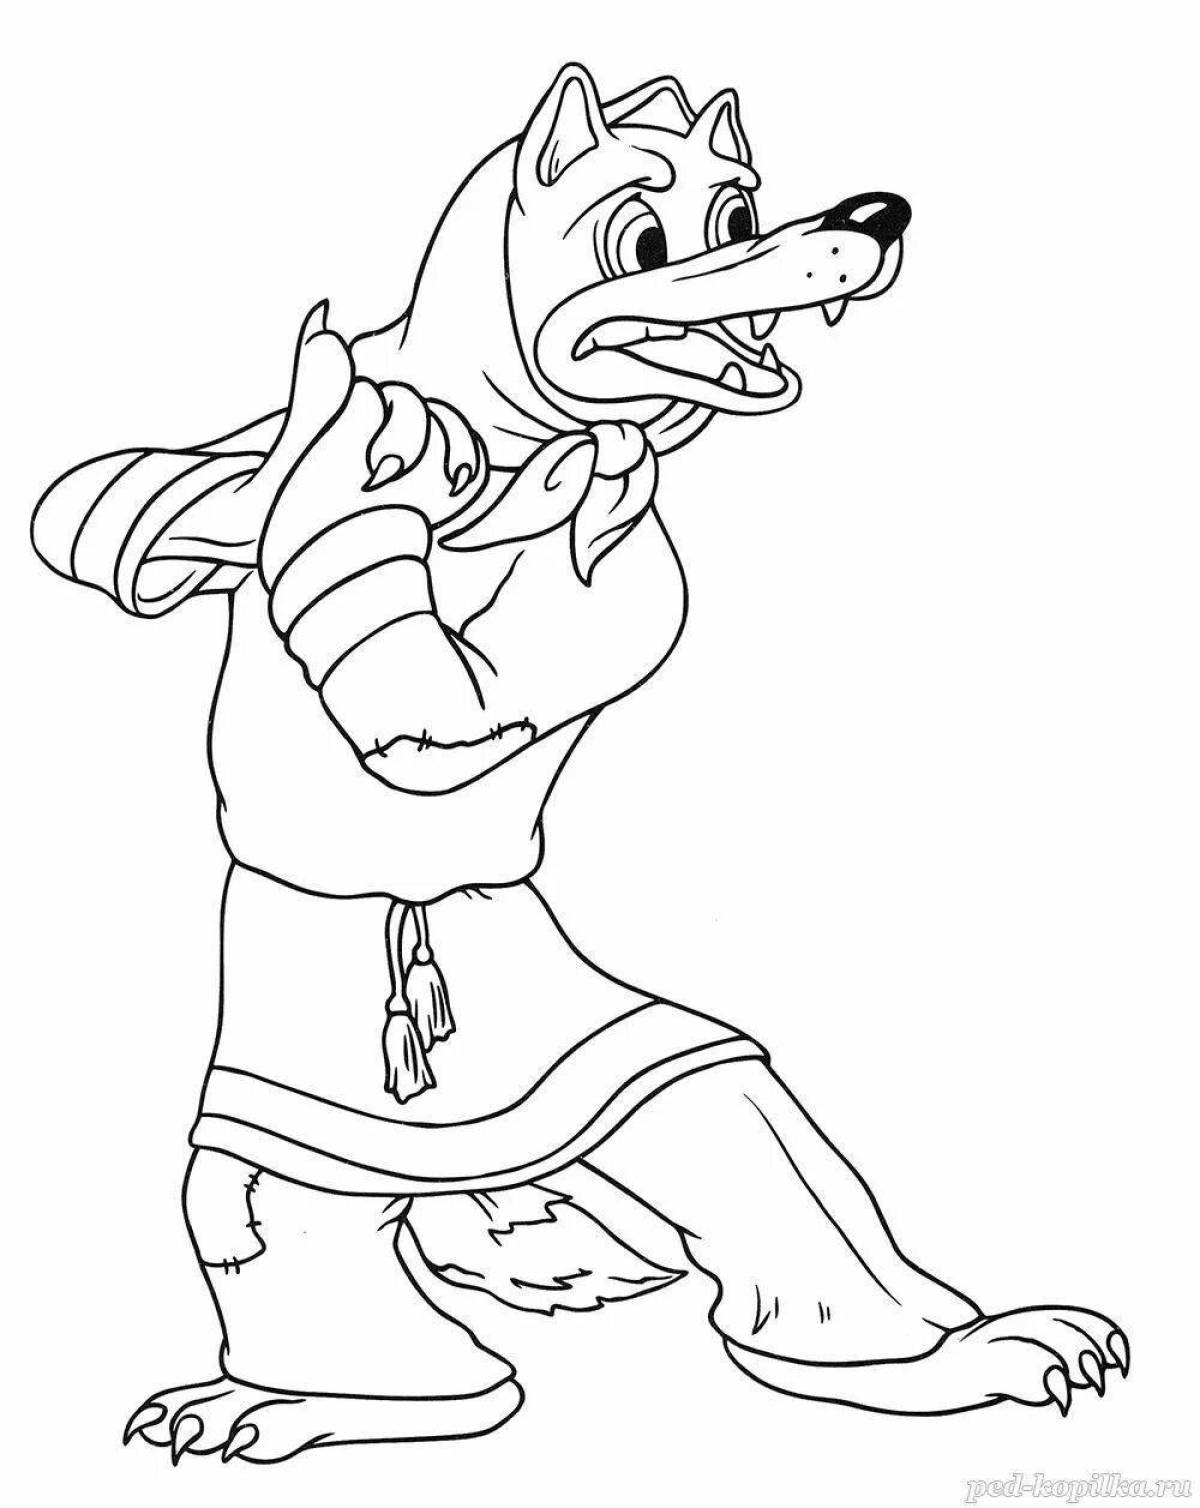 Sweet wolf and seven children coloring page